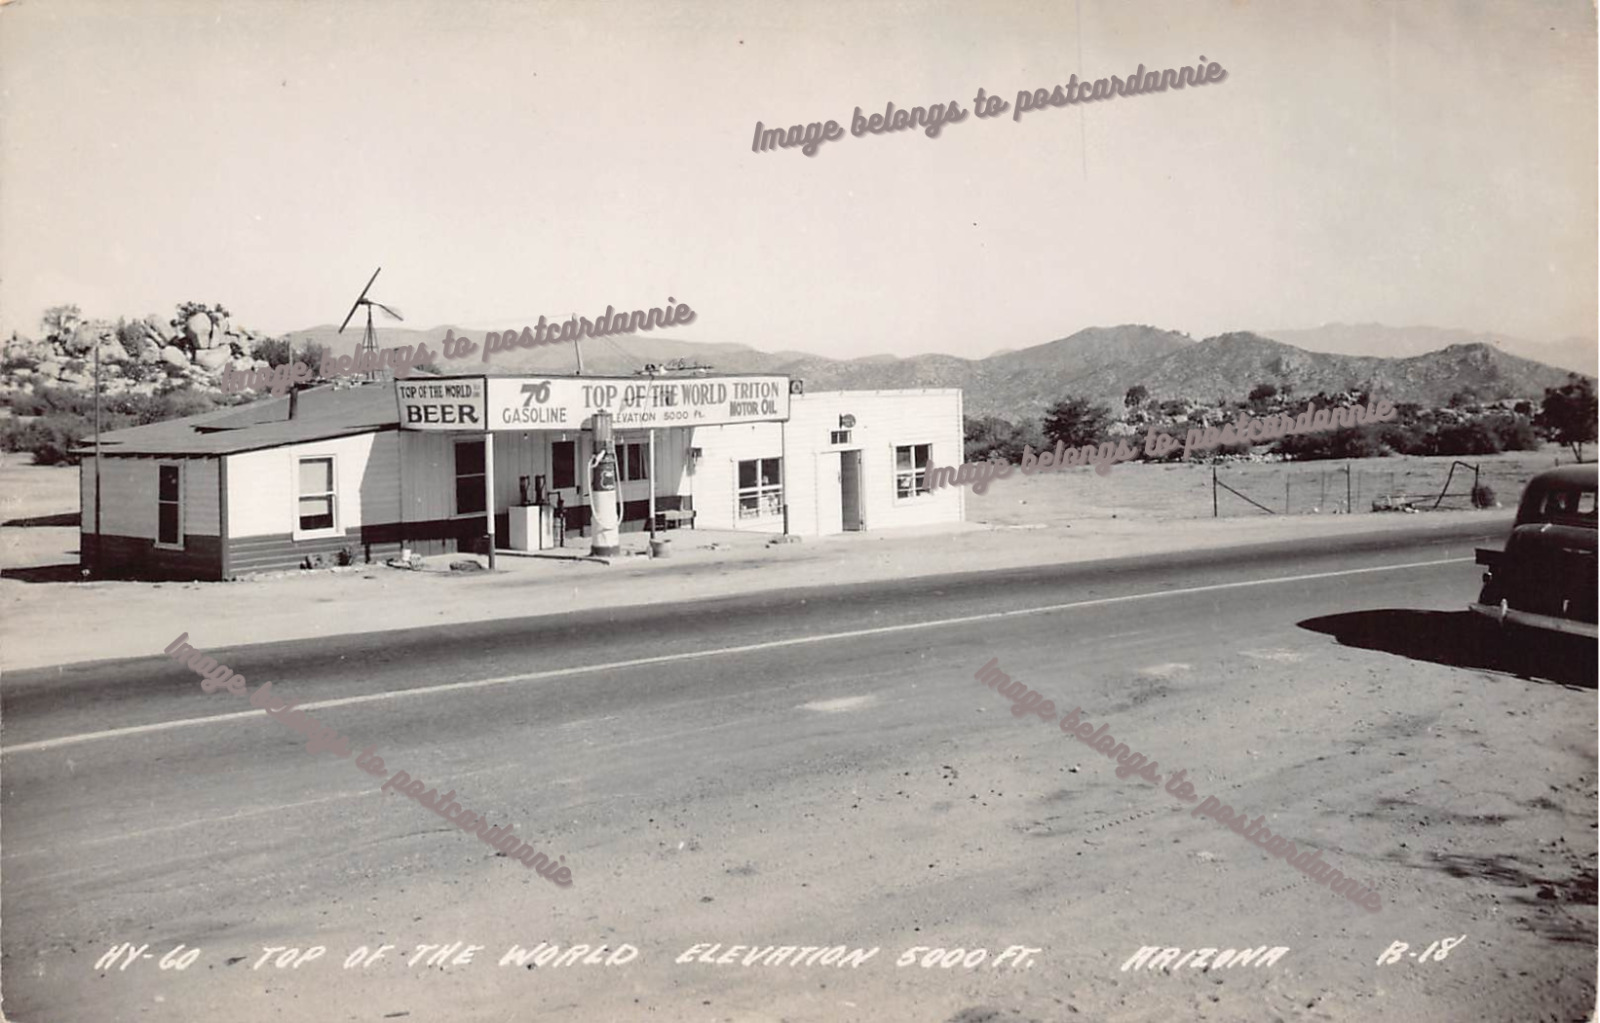 RPPC Route Hwy 60 Arizona 76 Gas Station Top of the World Photo Postcard B61